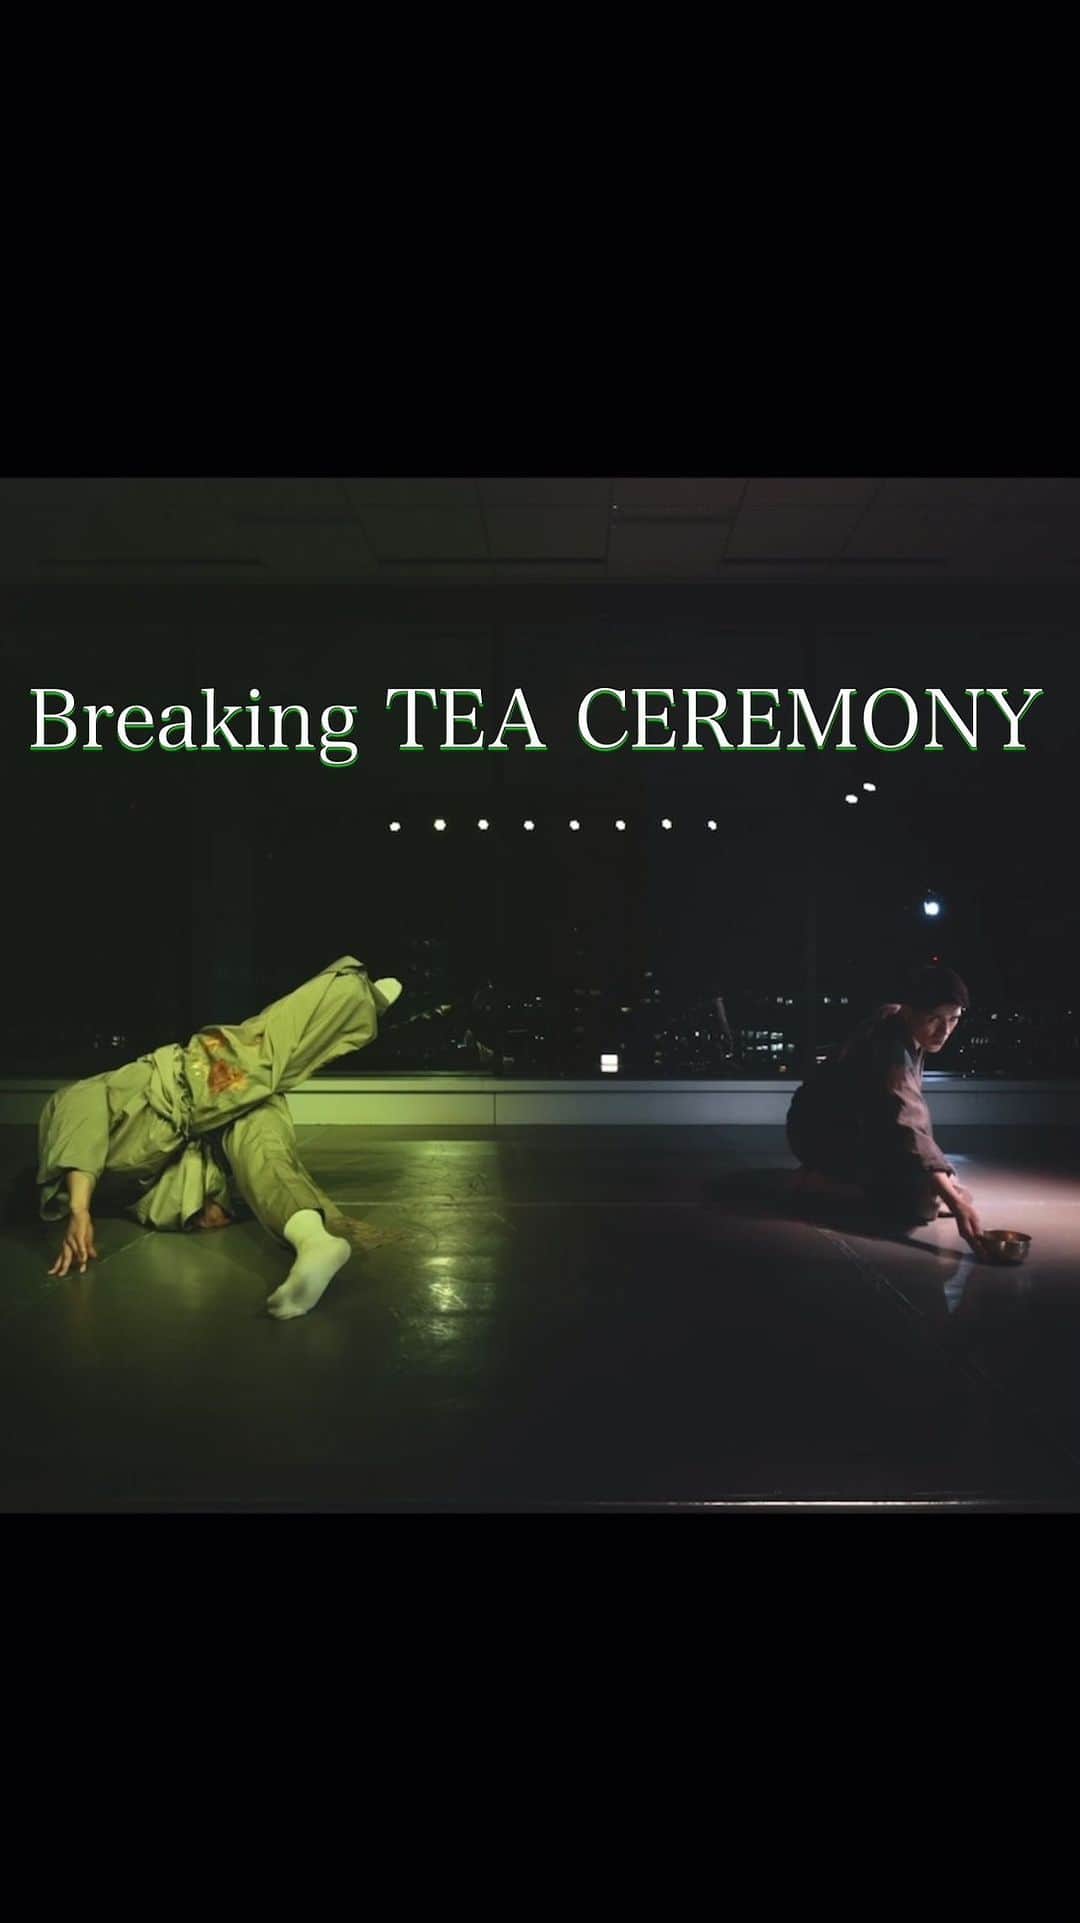 asukaのインスタグラム：「Breaking TEA CEREMONY  YouTube “ARAWASHI 現し" Full ver. out now!!  @rickey_rikikumakawa × @bboy_asuka   Directed by @ara_wa_shi   "Wabi-cha" composed by Rikyu. A little before then... in a corner of the world at that time... It's the figure of a person contemplating his own style of tea. In his spiritual world, MATCHA dances and dances freely. It's already broken the concept, and apparently it is.  千利休から成る"侘び茶" それより少し前か…その頃の世界の片隅か…己の茶のスタイルを模索する者の姿である。彼の精神世界では抹茶が自由に踊り、舞う。様々な既成概念を壊して、そして生み出そうとしている。  Director @tsuyoshi_kaseda   Assistant Director @kenaoki_chinmujien   Videographer of backstage @makiyokoyama   Support member @saki_choreography313   #japan #culture  #dance#music#choreography#outfits#tiktok#breaking#acrobatics#gymnastics#ダンス#ブレイキン#アクロバット」